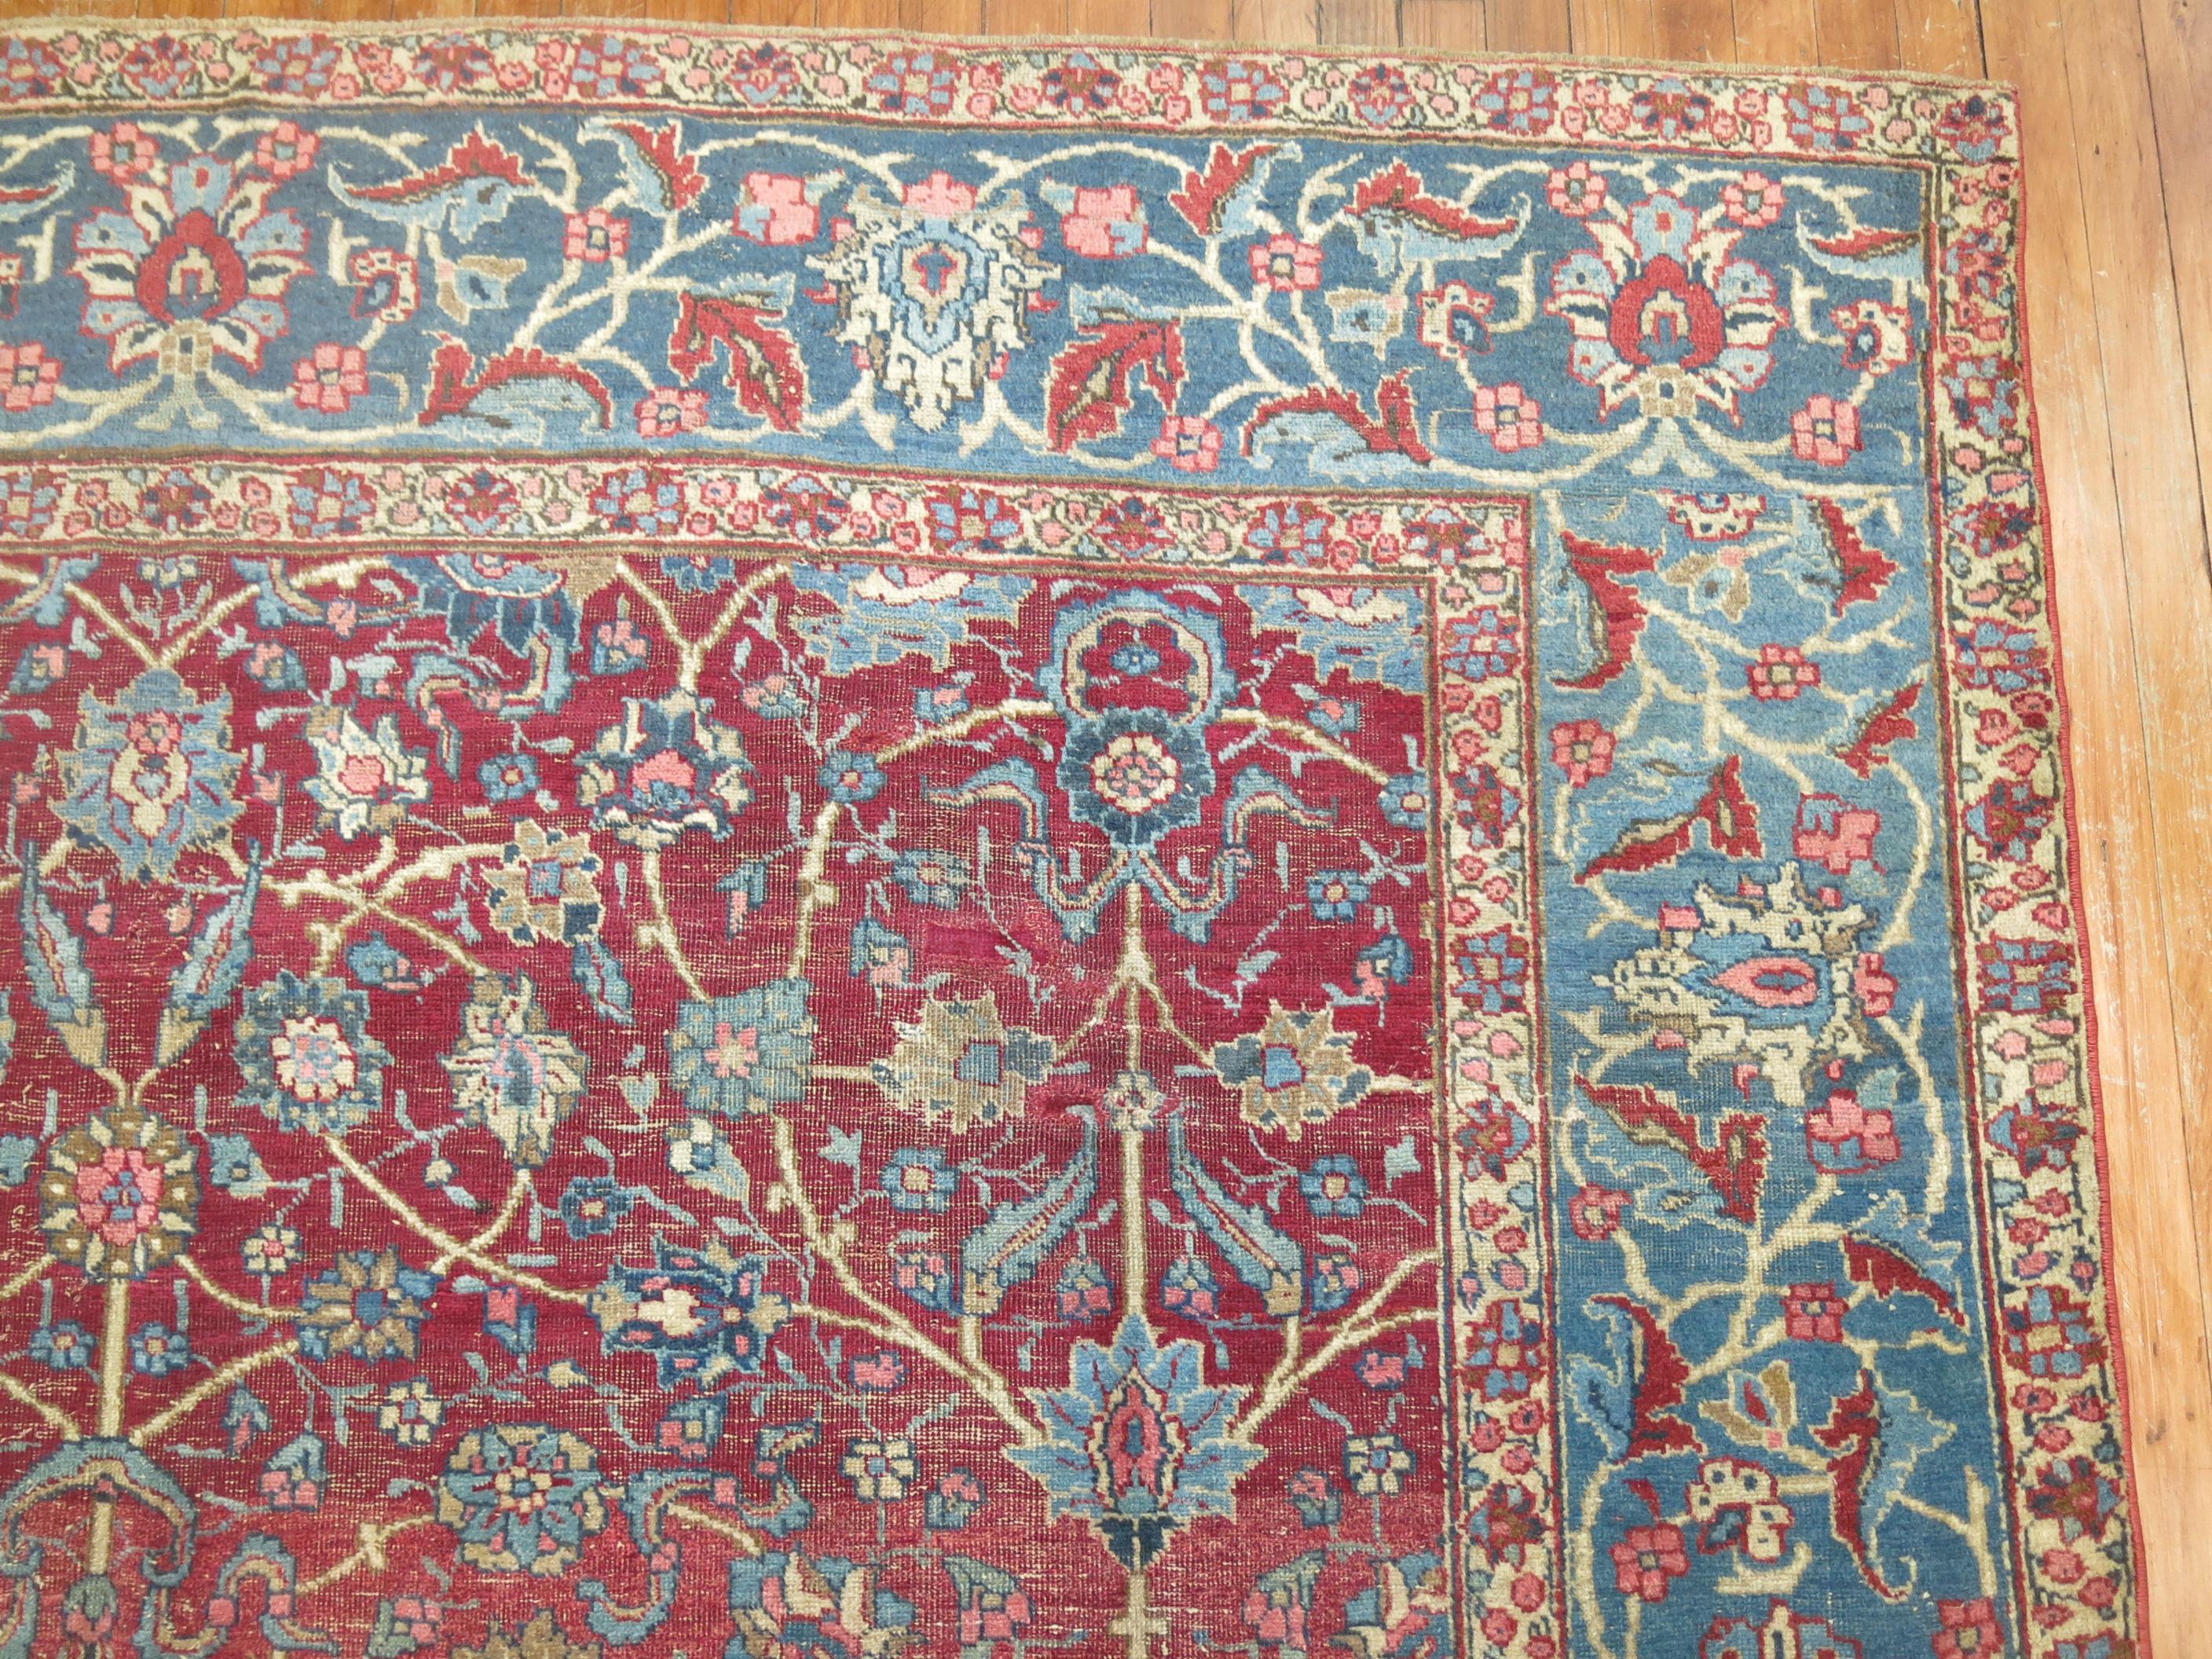 Early 20th Century Room Size Antique Persian Tabriz Rug In Good Condition For Sale In New York, NY